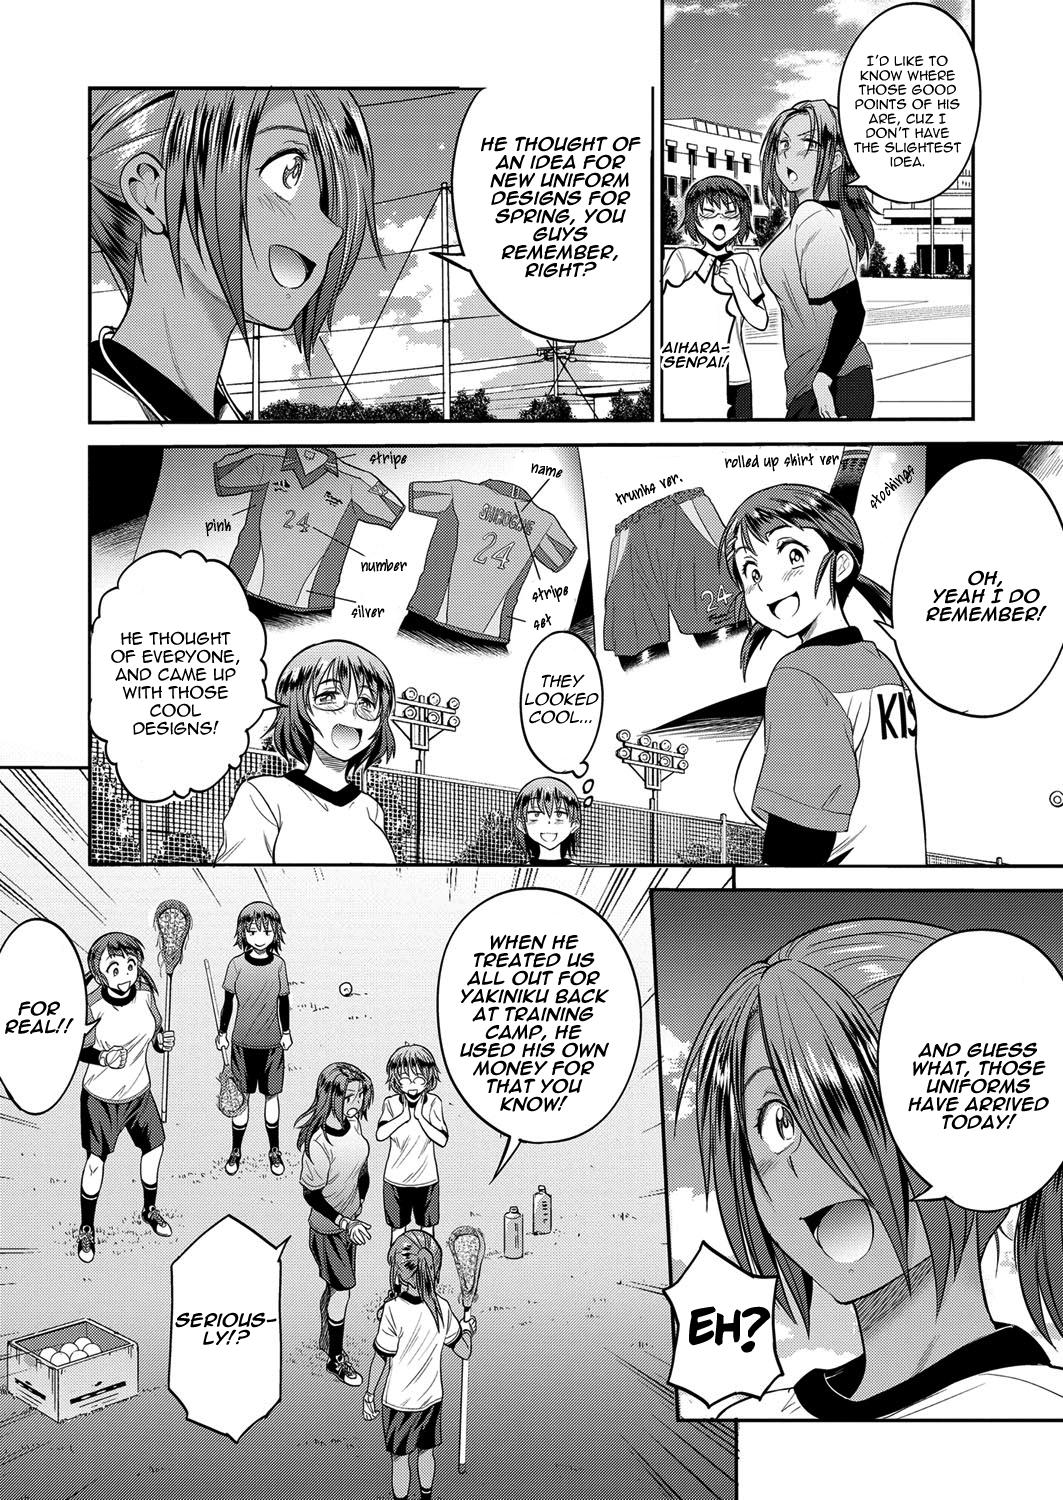 Livesex [DISTANCE] Joshi Lacu! - Girls Lacrosse Club ~2 Years Later~ Ch. 1.5 (COMIC ExE 06) [English] [TripleSevenScans] [Digital] Ladyboy - Page 2